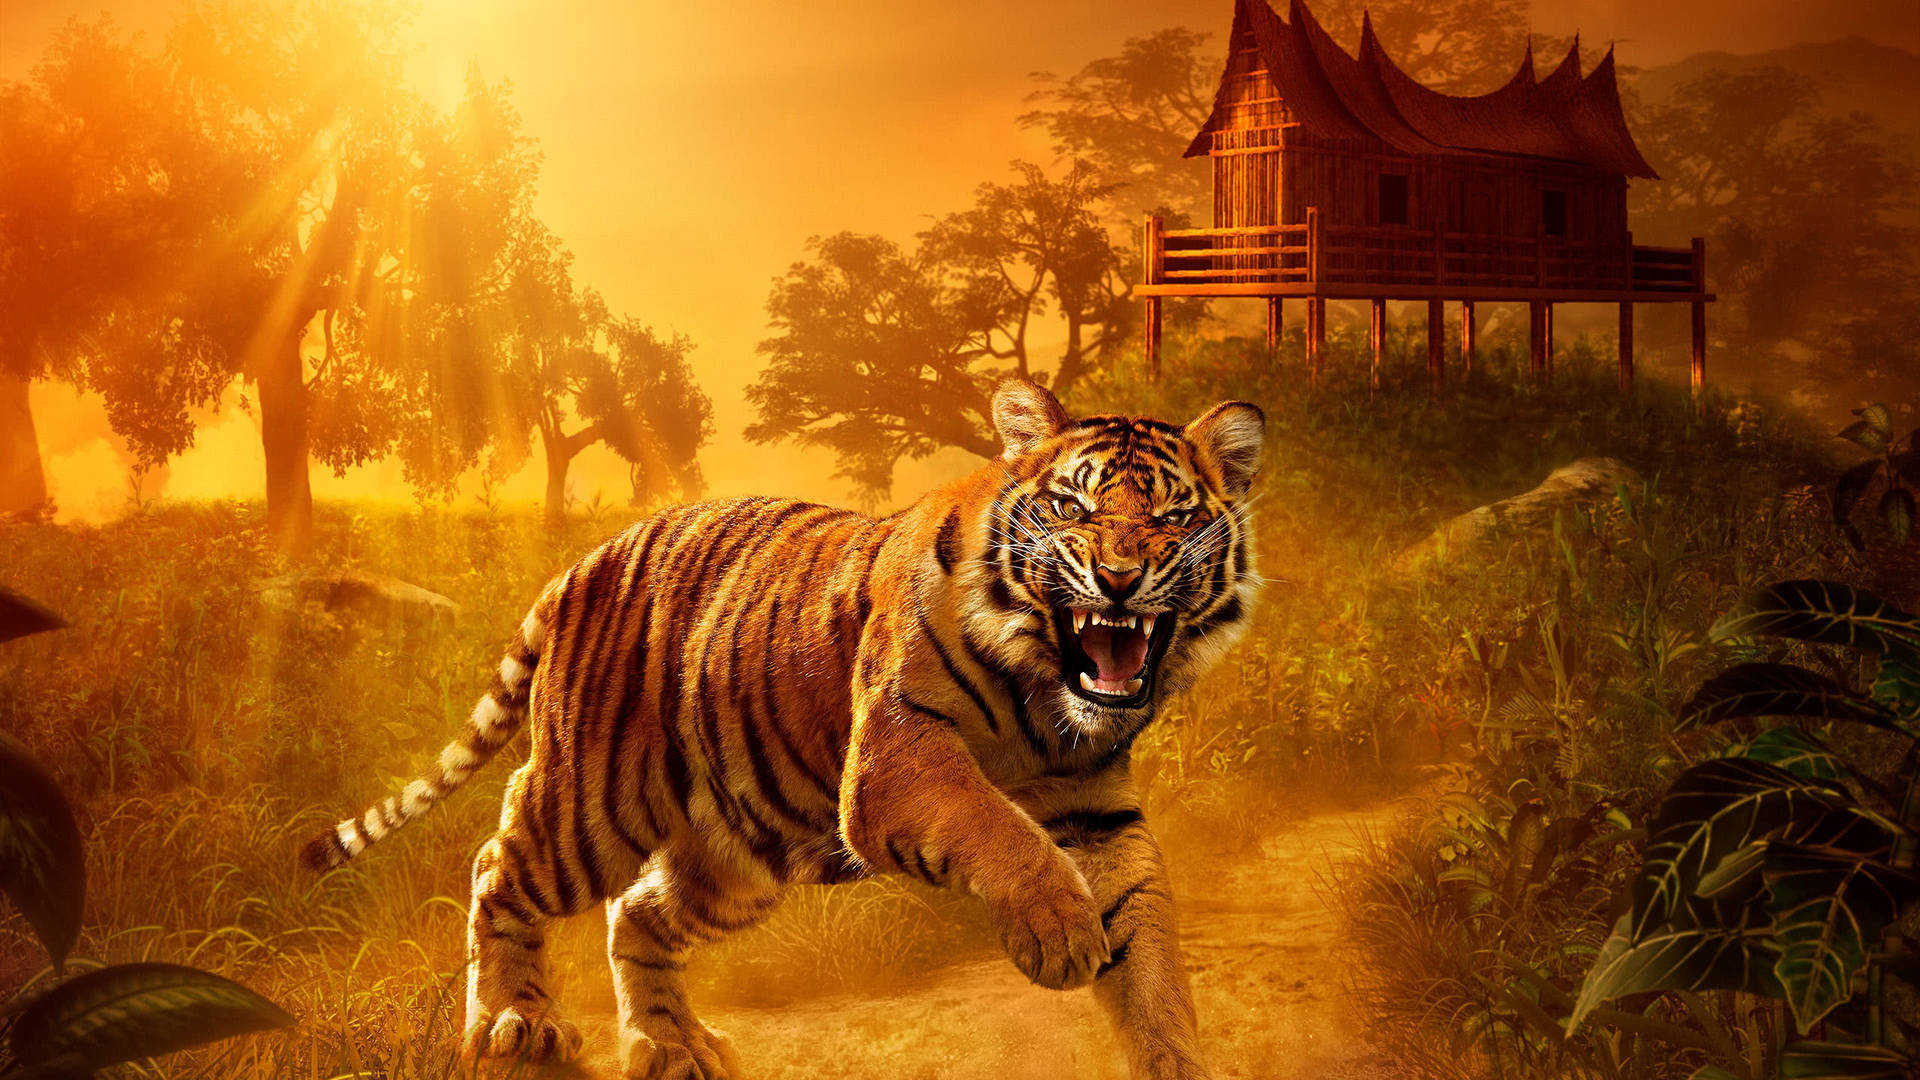 1440p Hd Tiger In Forest Orange Aesthetic Background